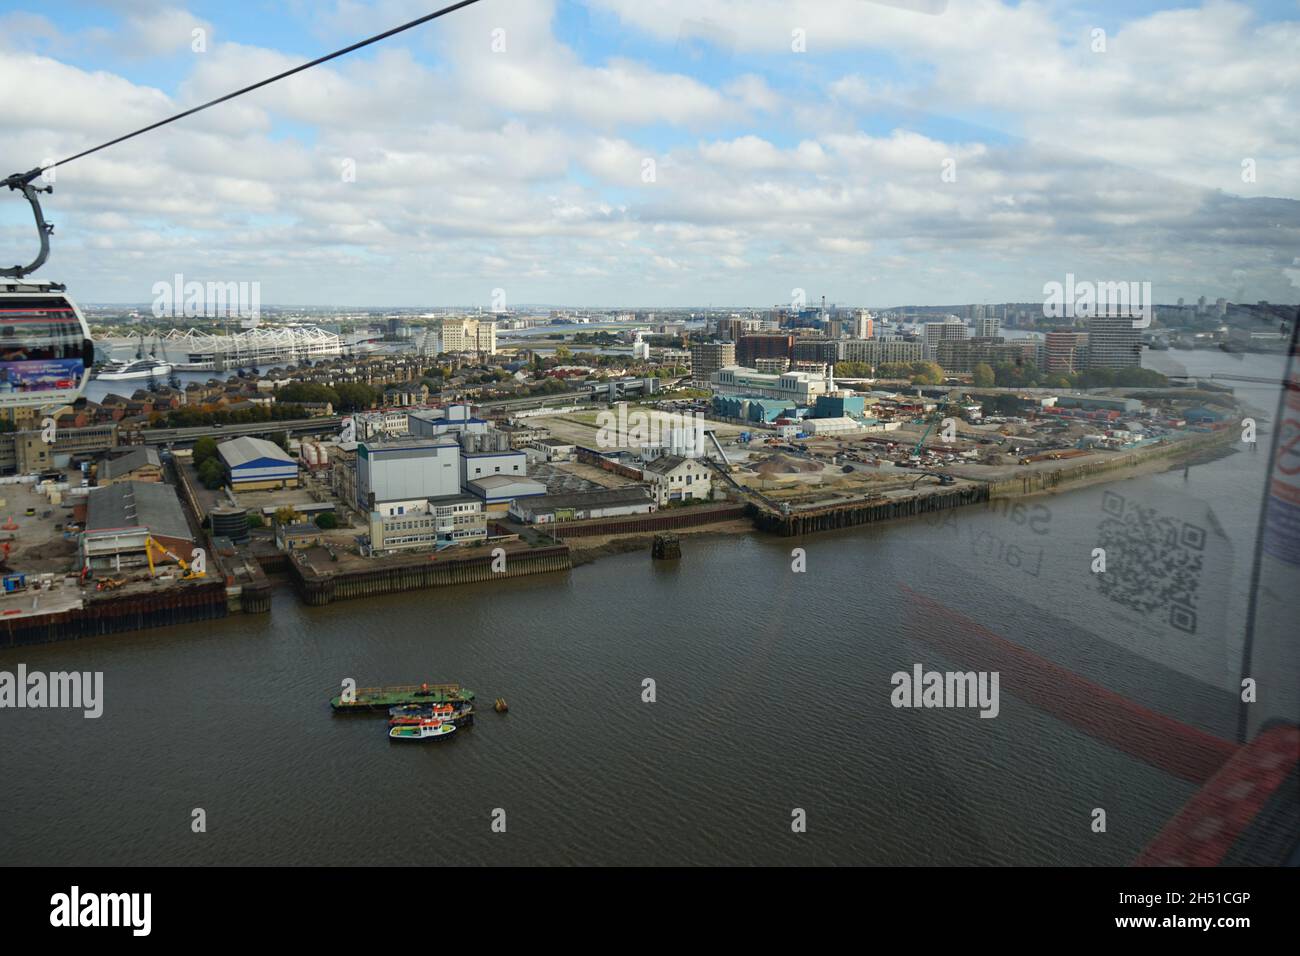 An aerial view of the Emirates Cable Cars approaching the Royal Dock over London River Thames in he U.K Stock Photo